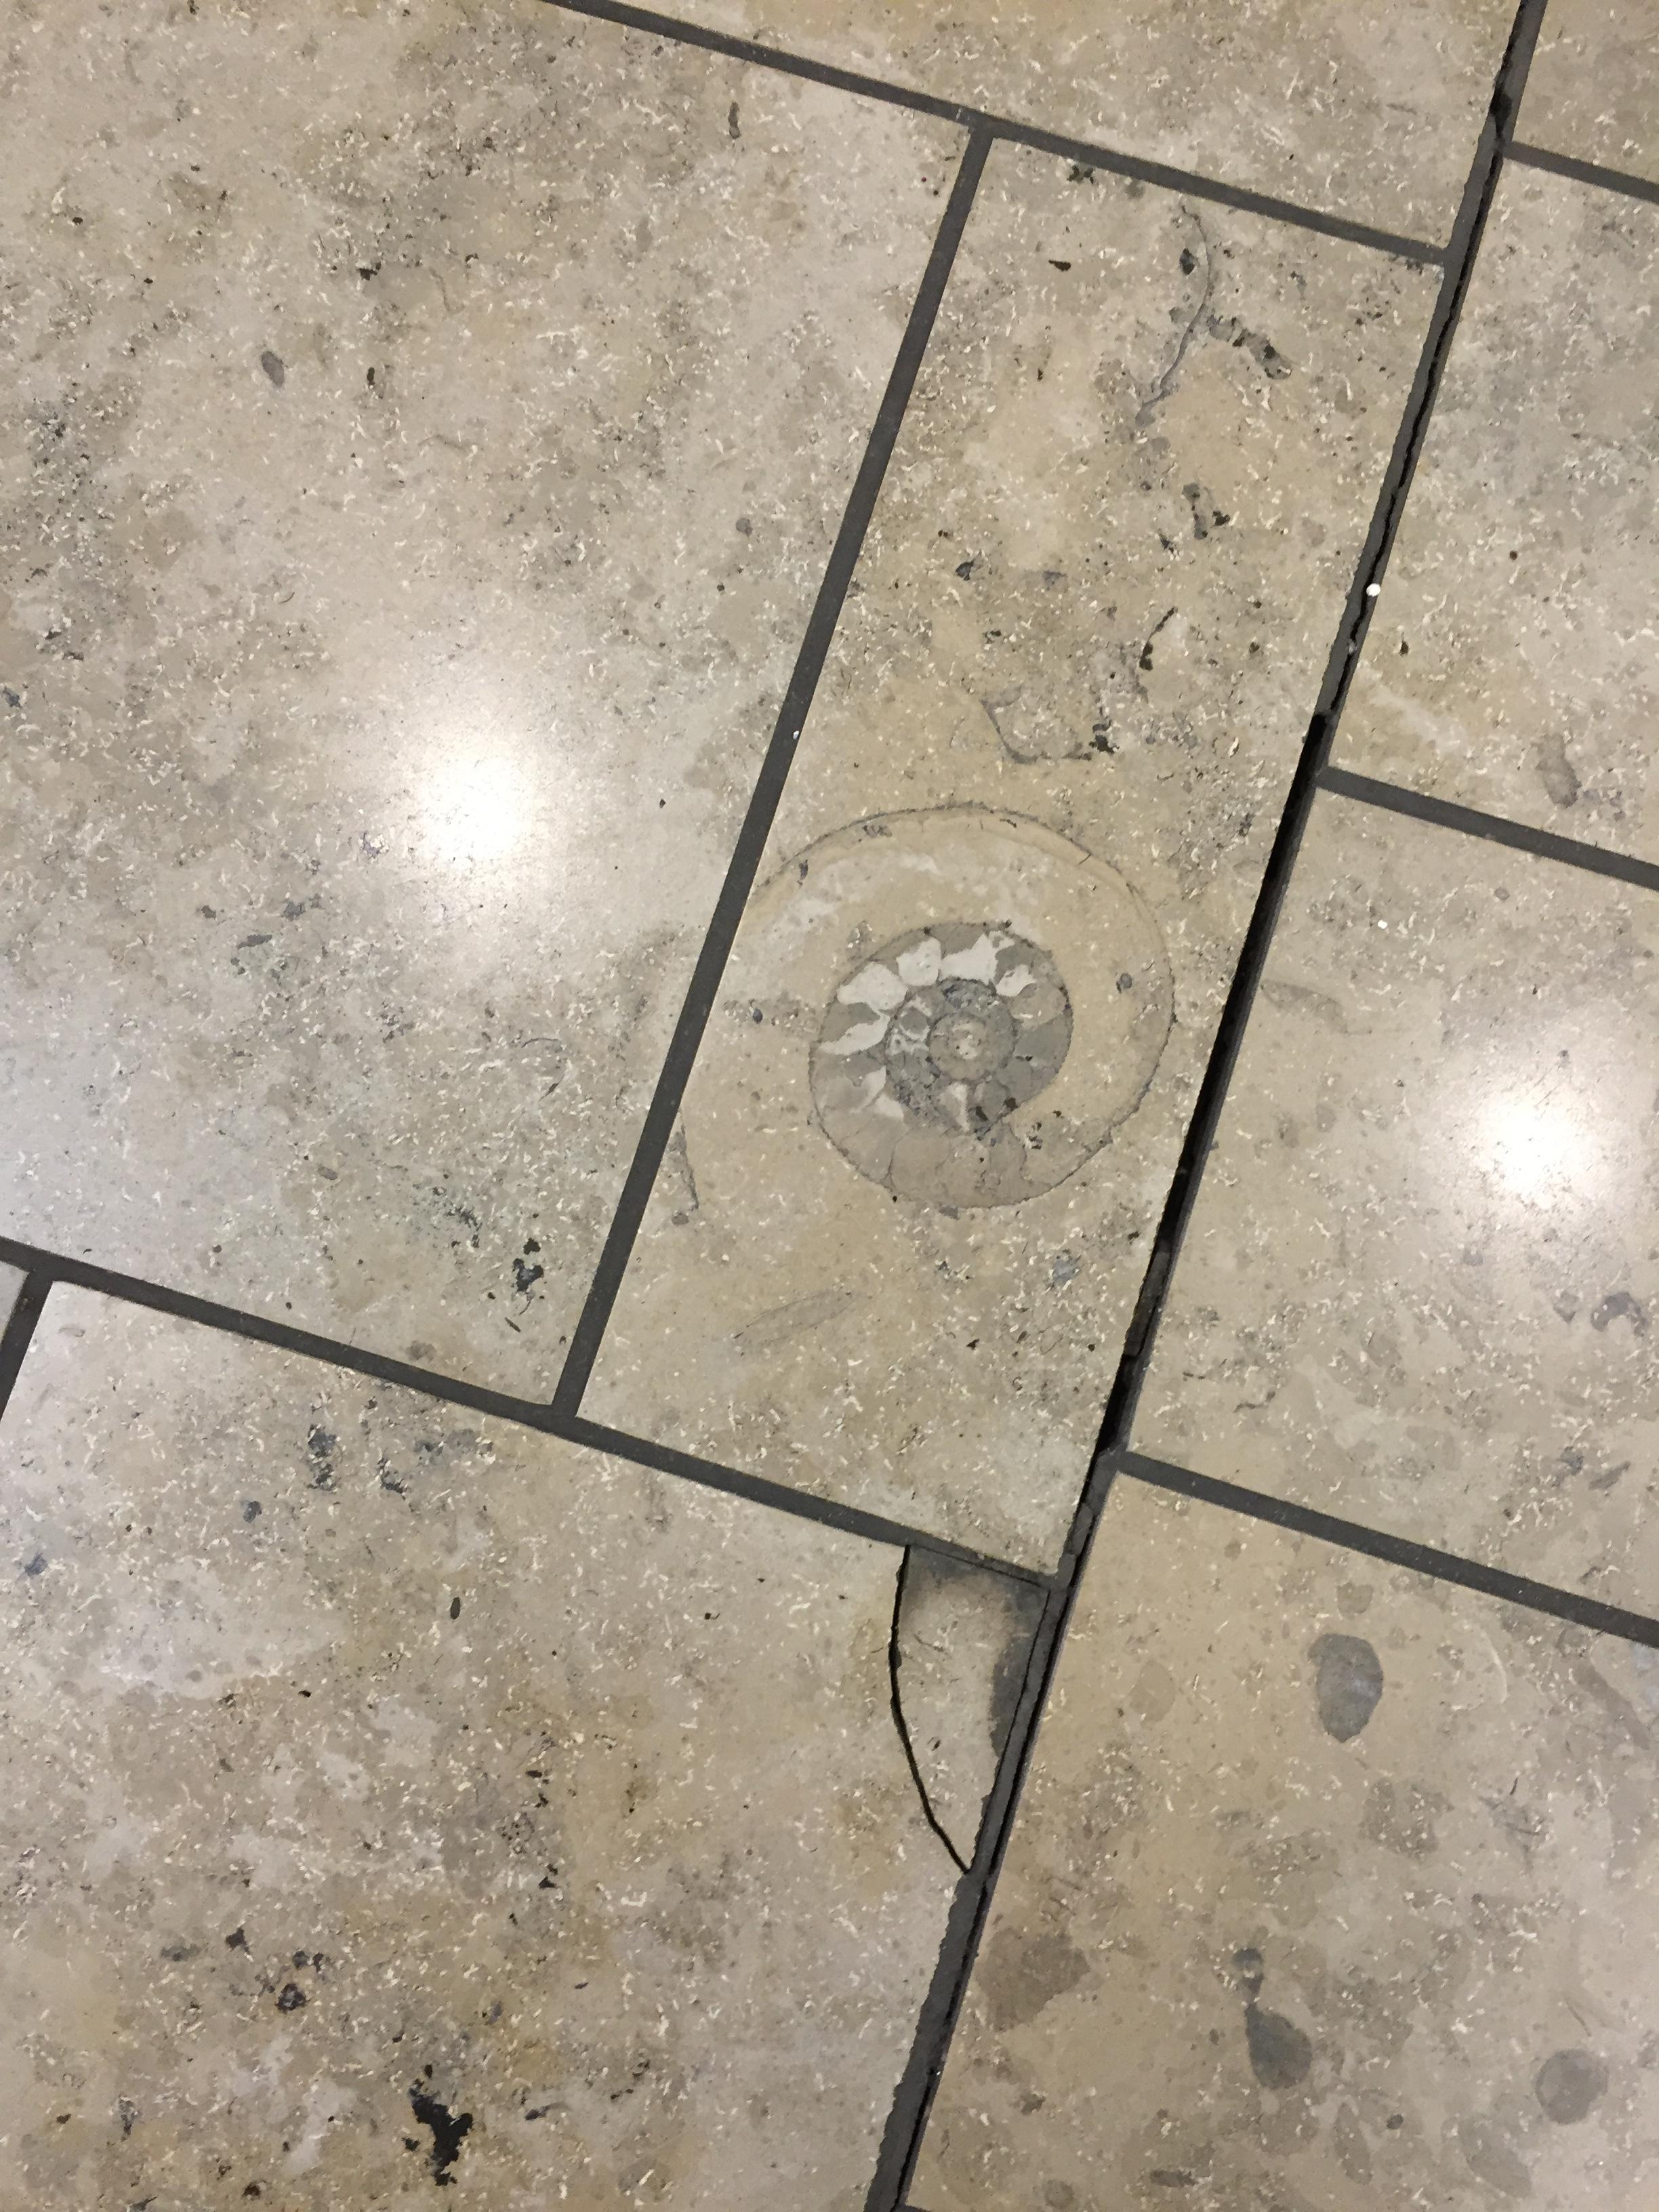 The stone that was used for this tile at the mall contained a 

fossil.